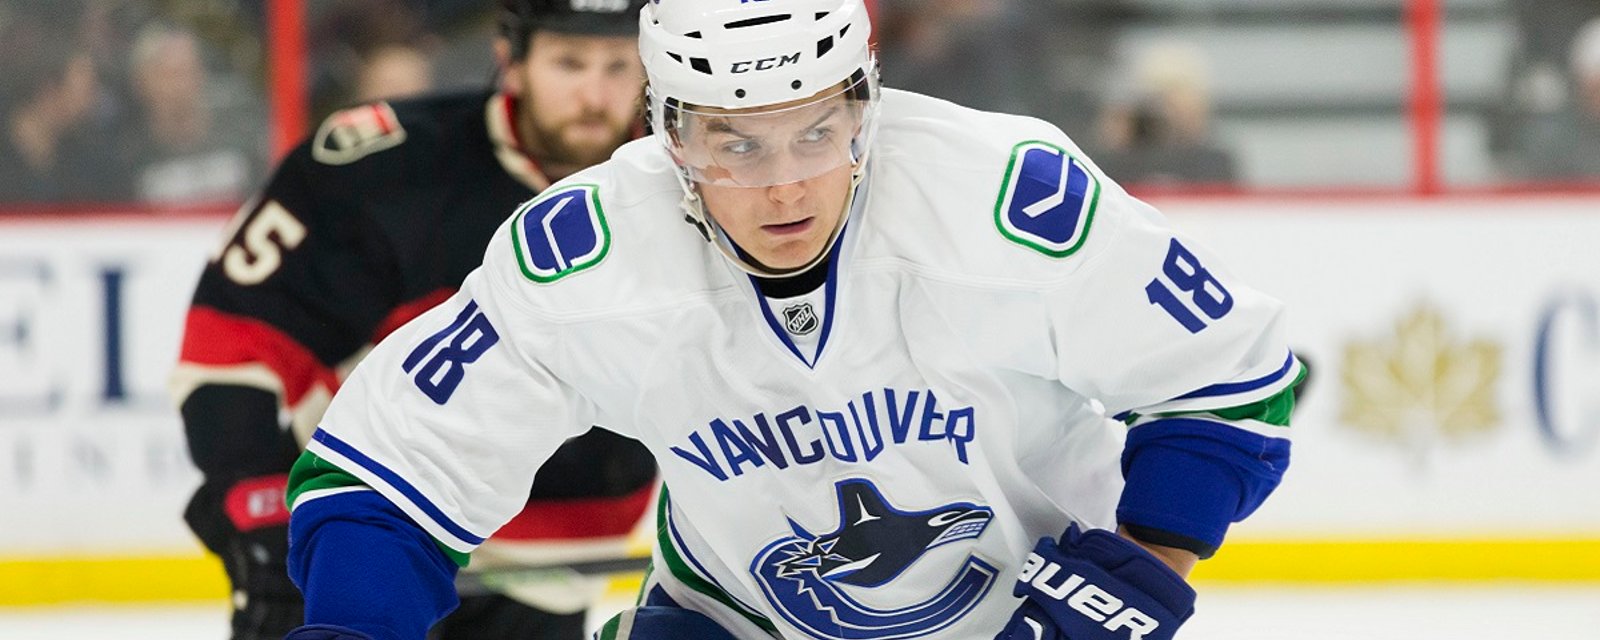 Canucks/NHL release statement on the Jake Virtanen situation.